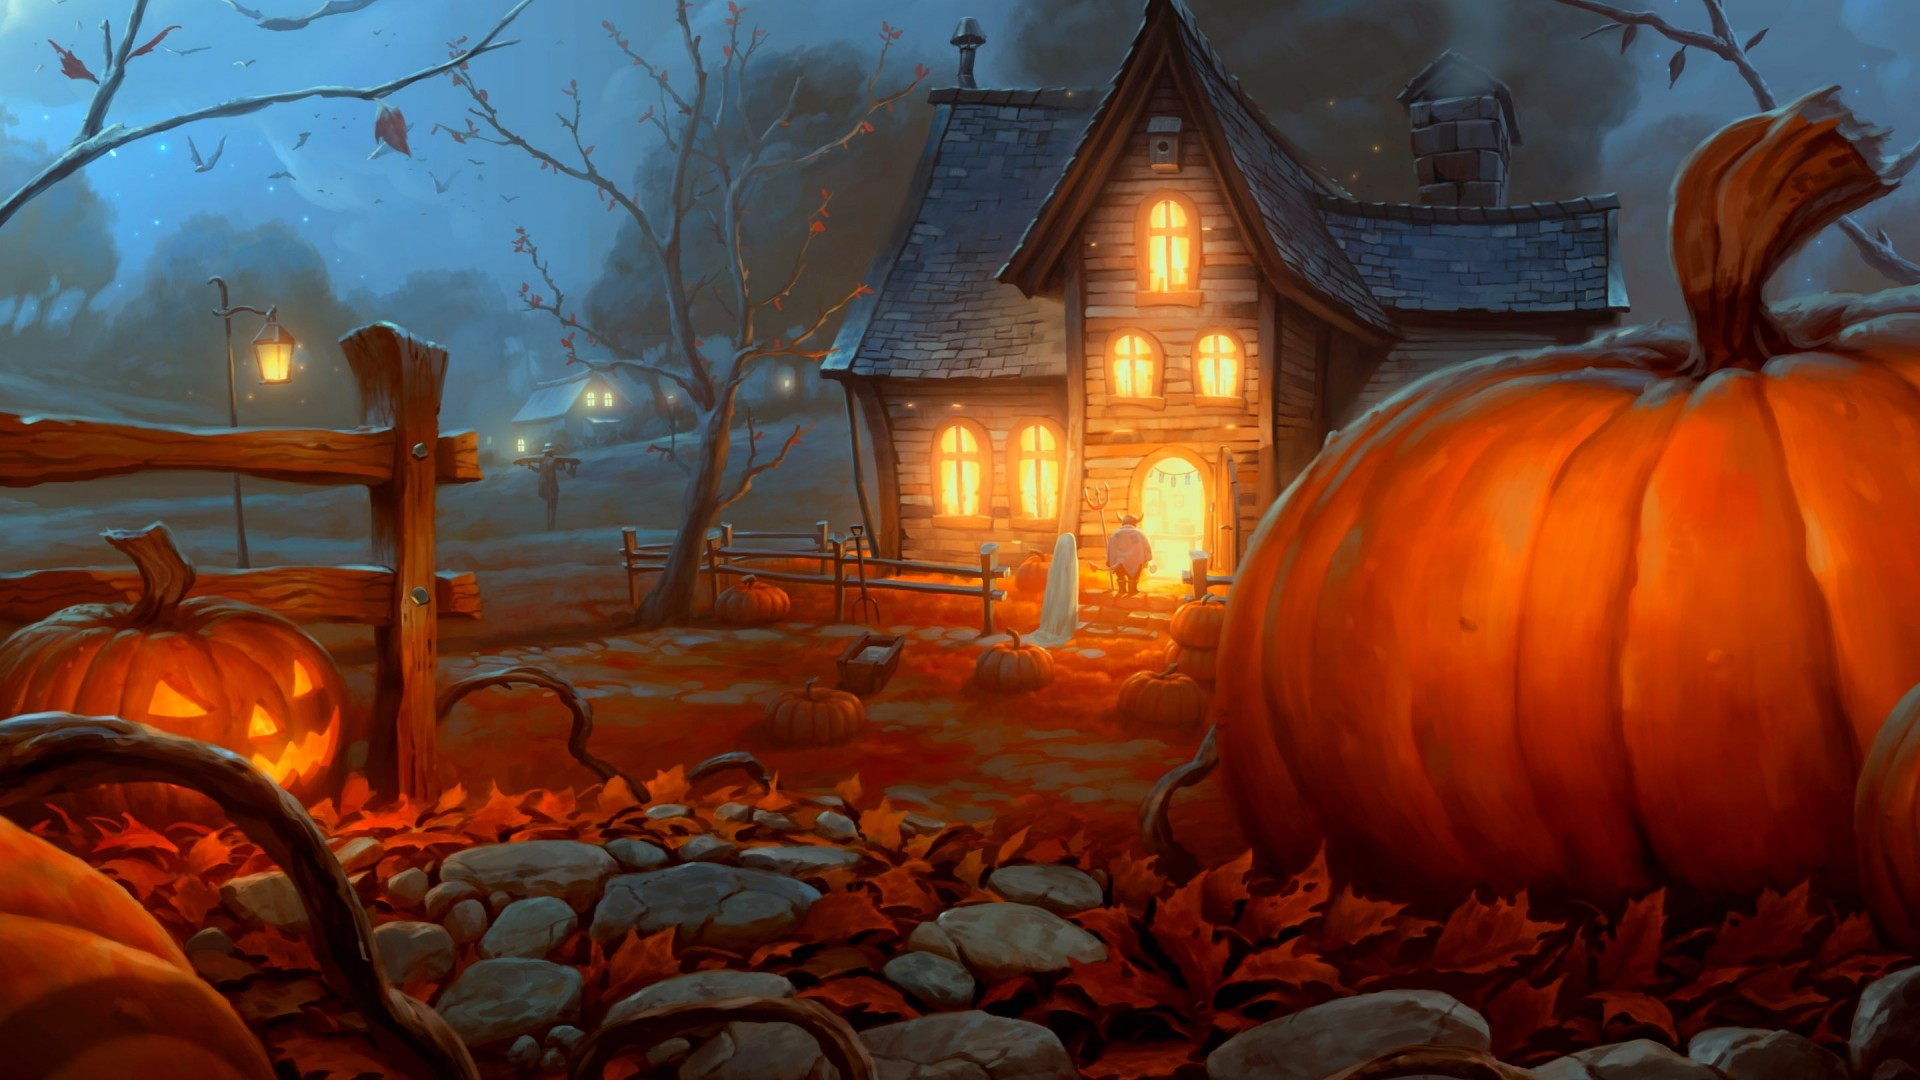 Computer Wallpapers Halloween with high-resolution 1920x1080 pixel. You can use this wallpaper for your Windows and Mac OS computers as well as your Android and iPhone smartphones